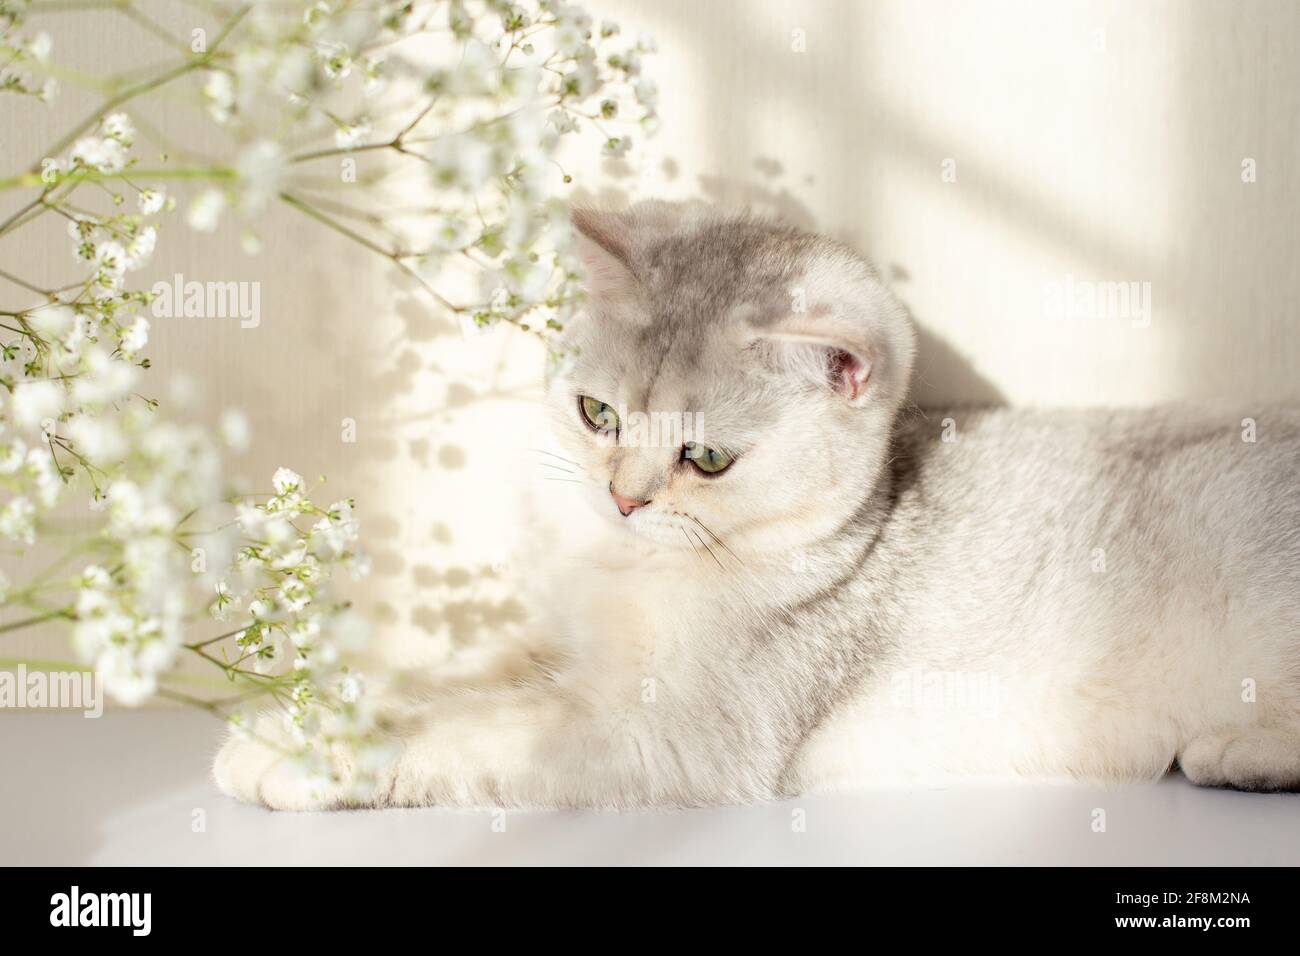 A cute white and gray British cat, green eyes, lies on a white table with a gypsophila flower Stock Photo